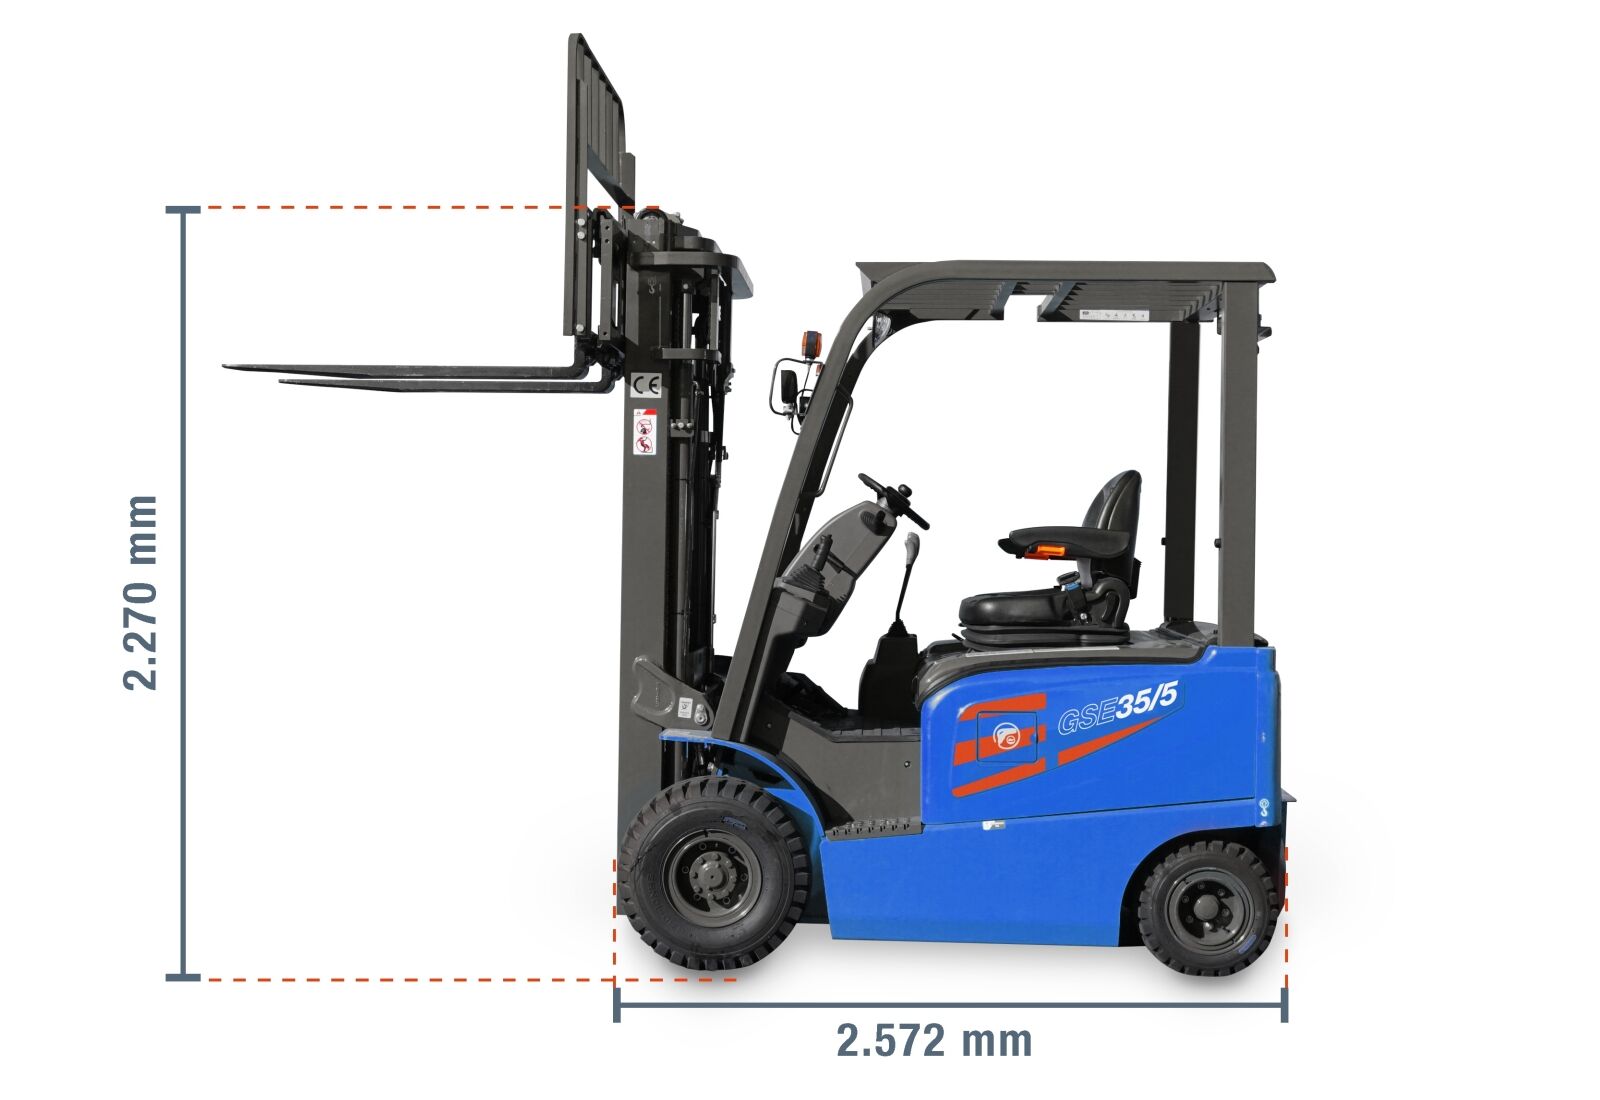 Forklift Dimensions: What Size Do You Need?